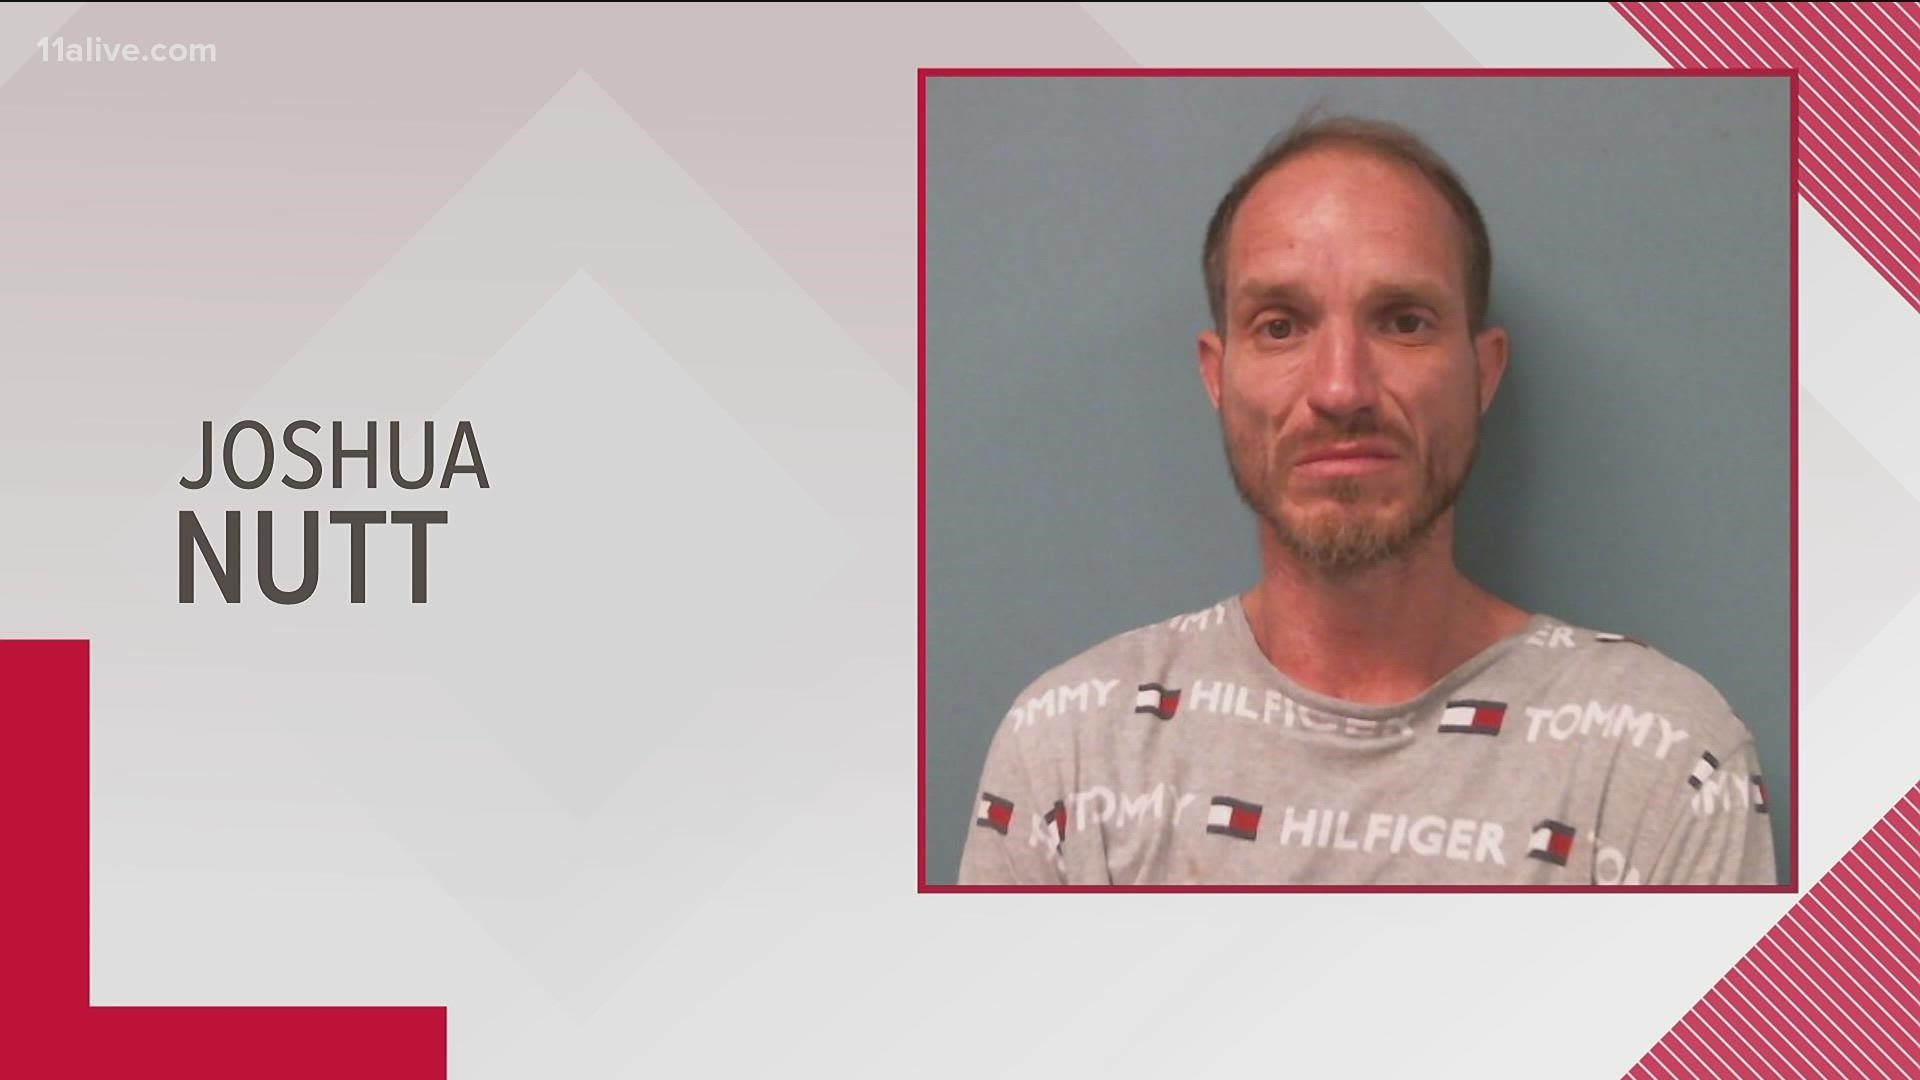 The Troup County Sheriff's Office says it's now arrested 39-year-old Joshua Nutt.